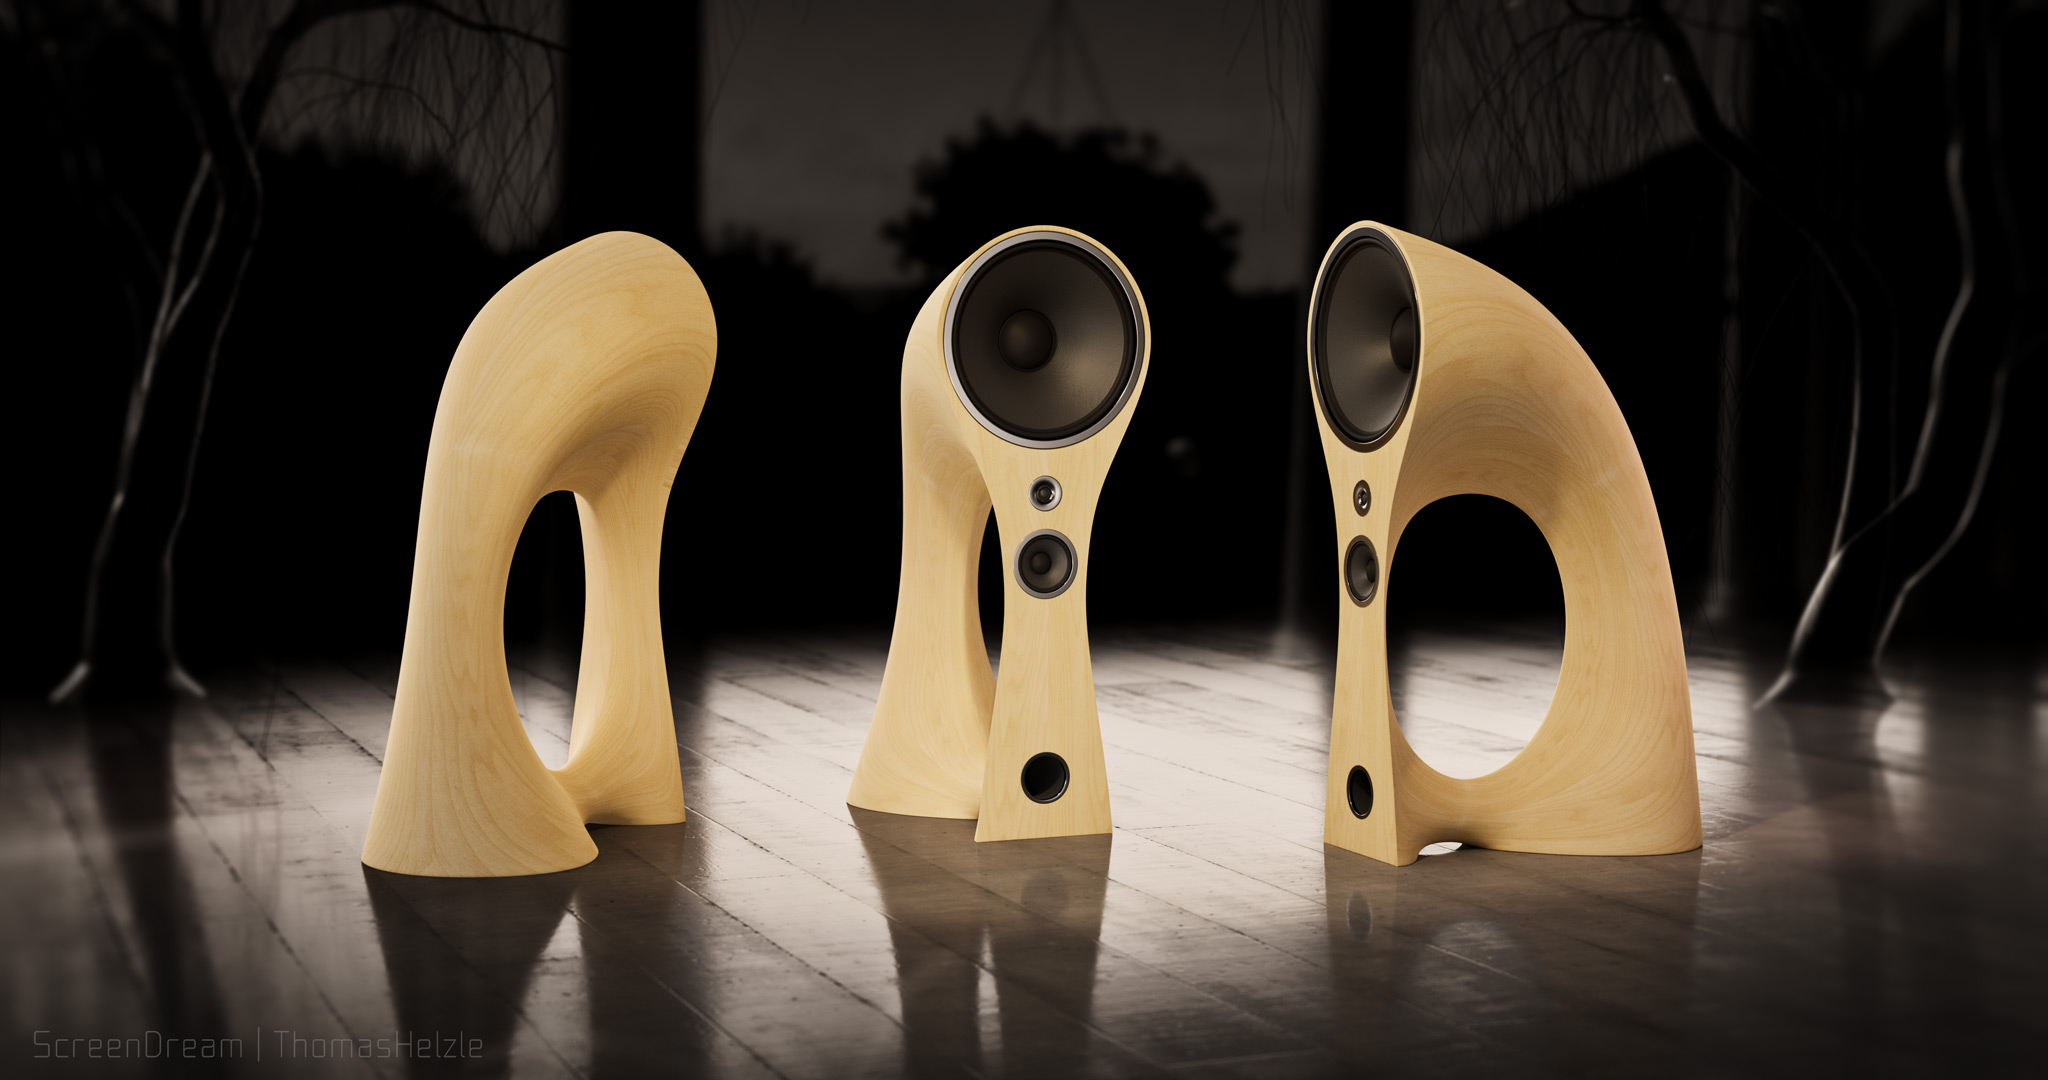 A sculptural loudspeaker design I hope to hear and touch one day...